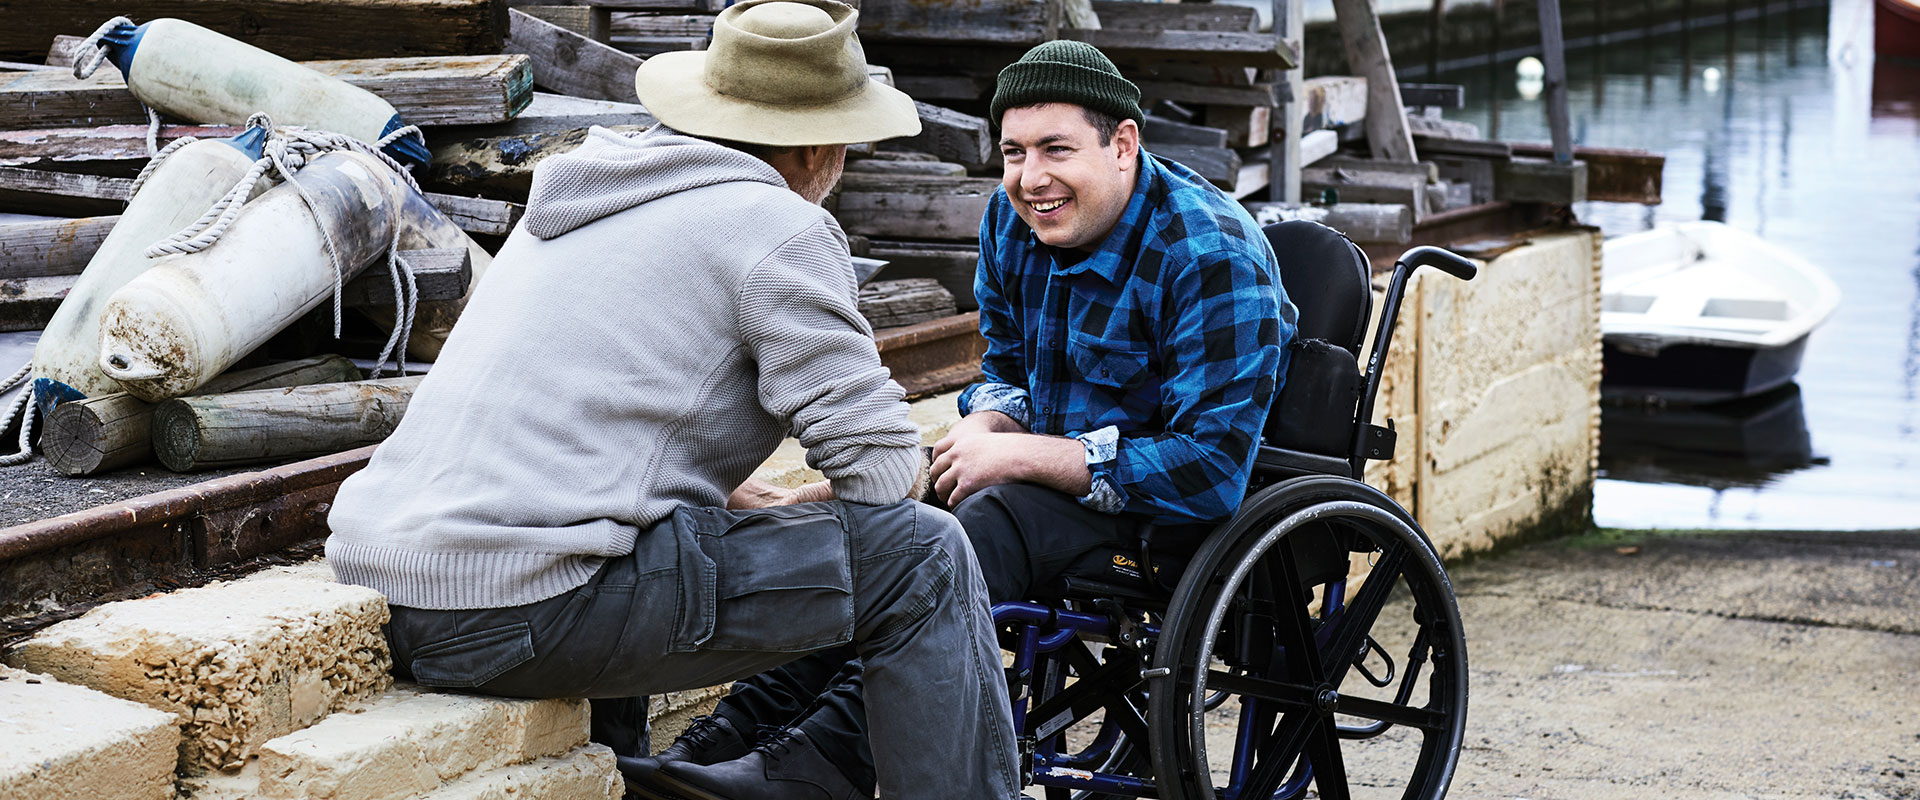 Man in a wheelchair having a chat with older man